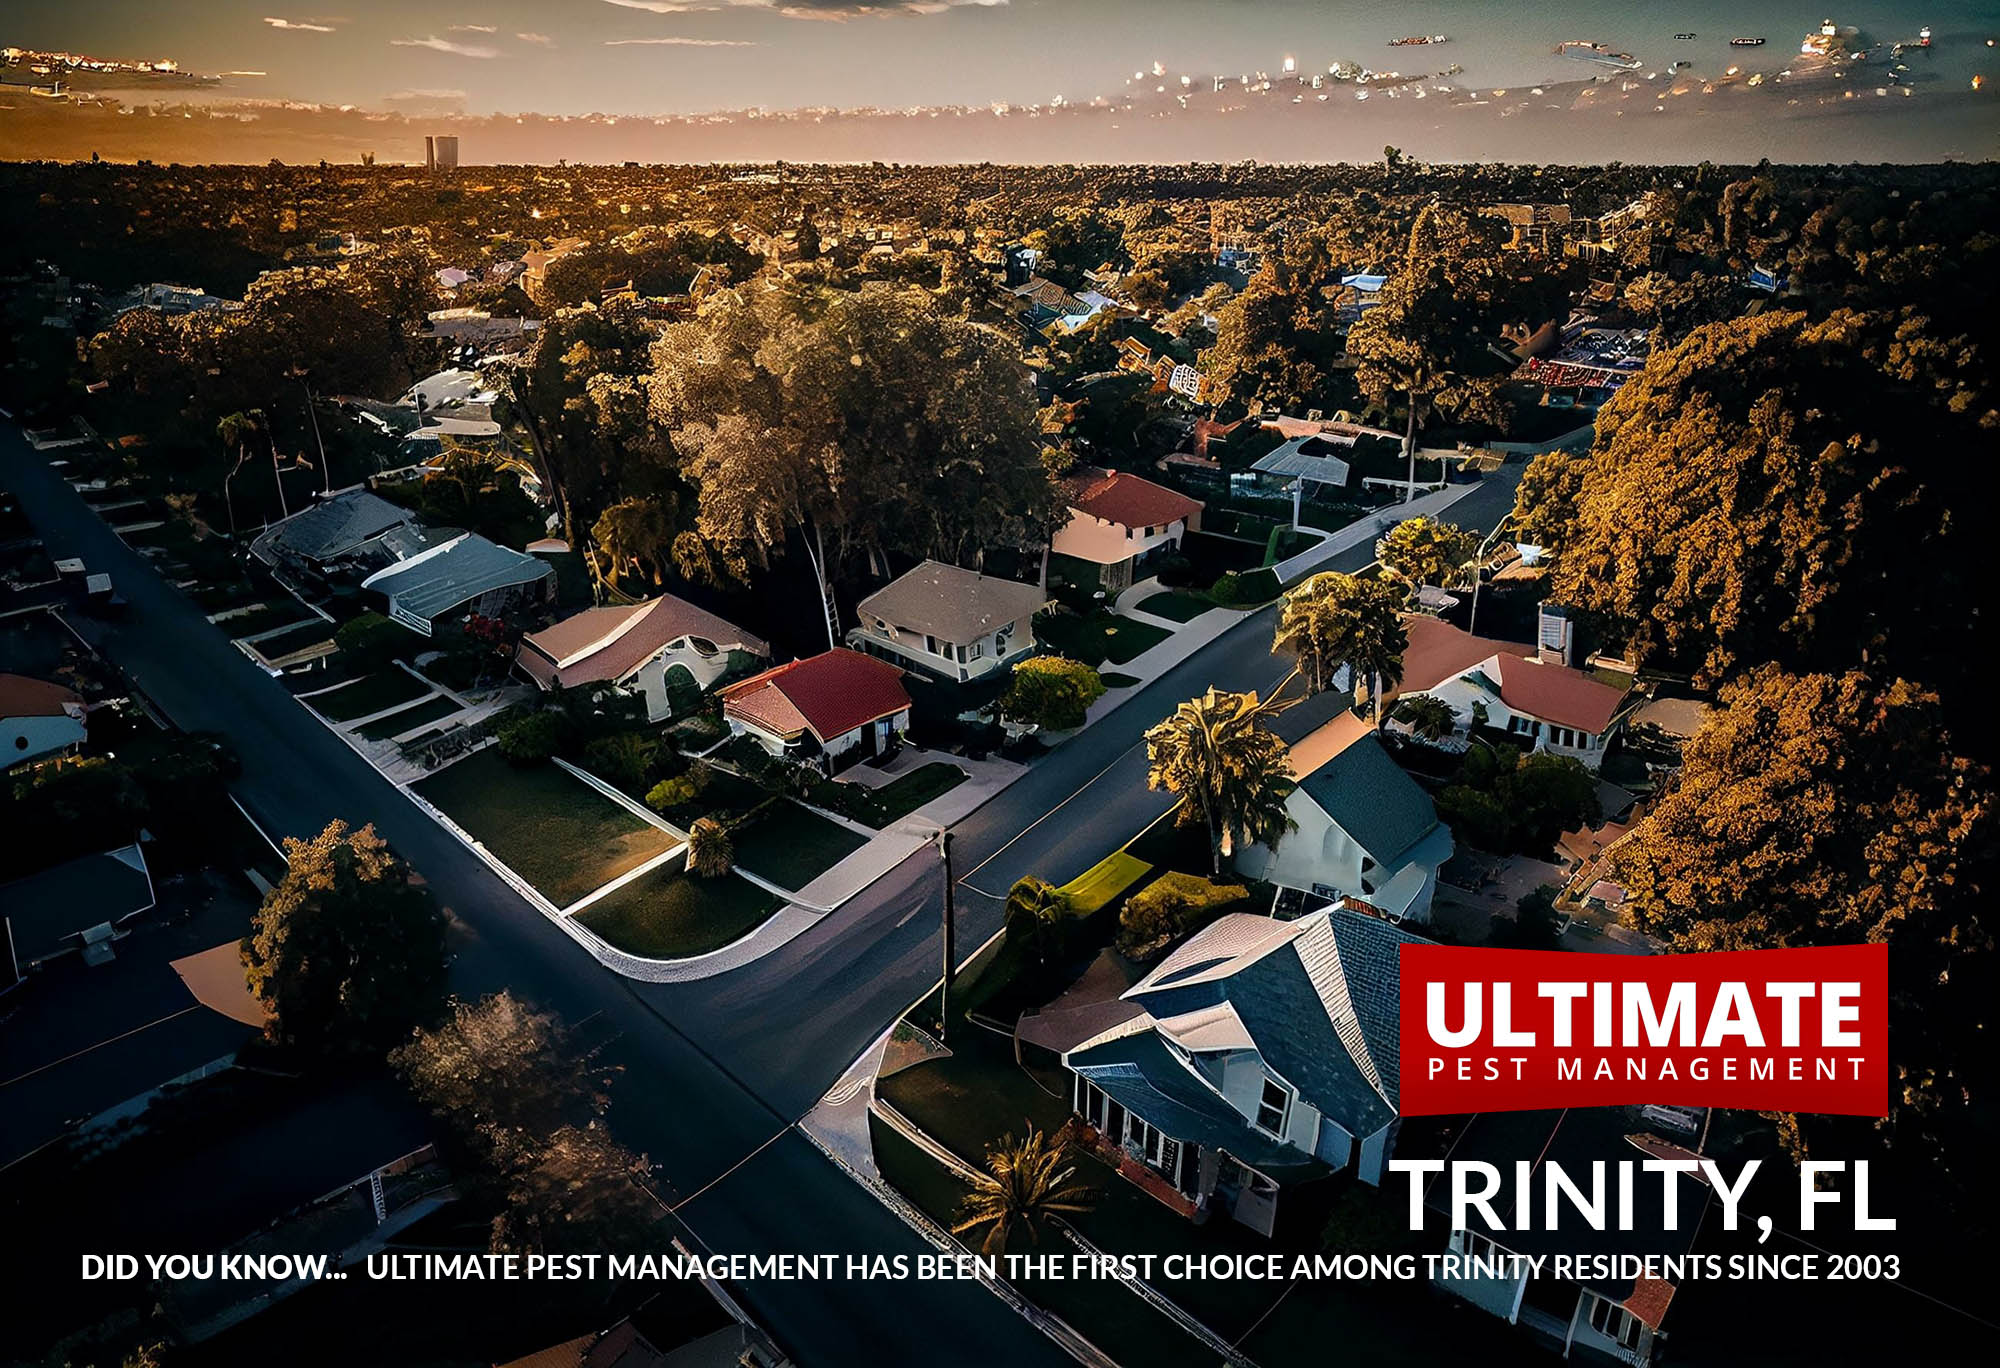 did you know ultimate pest management has been the first choice among Trinity Residents since 2003